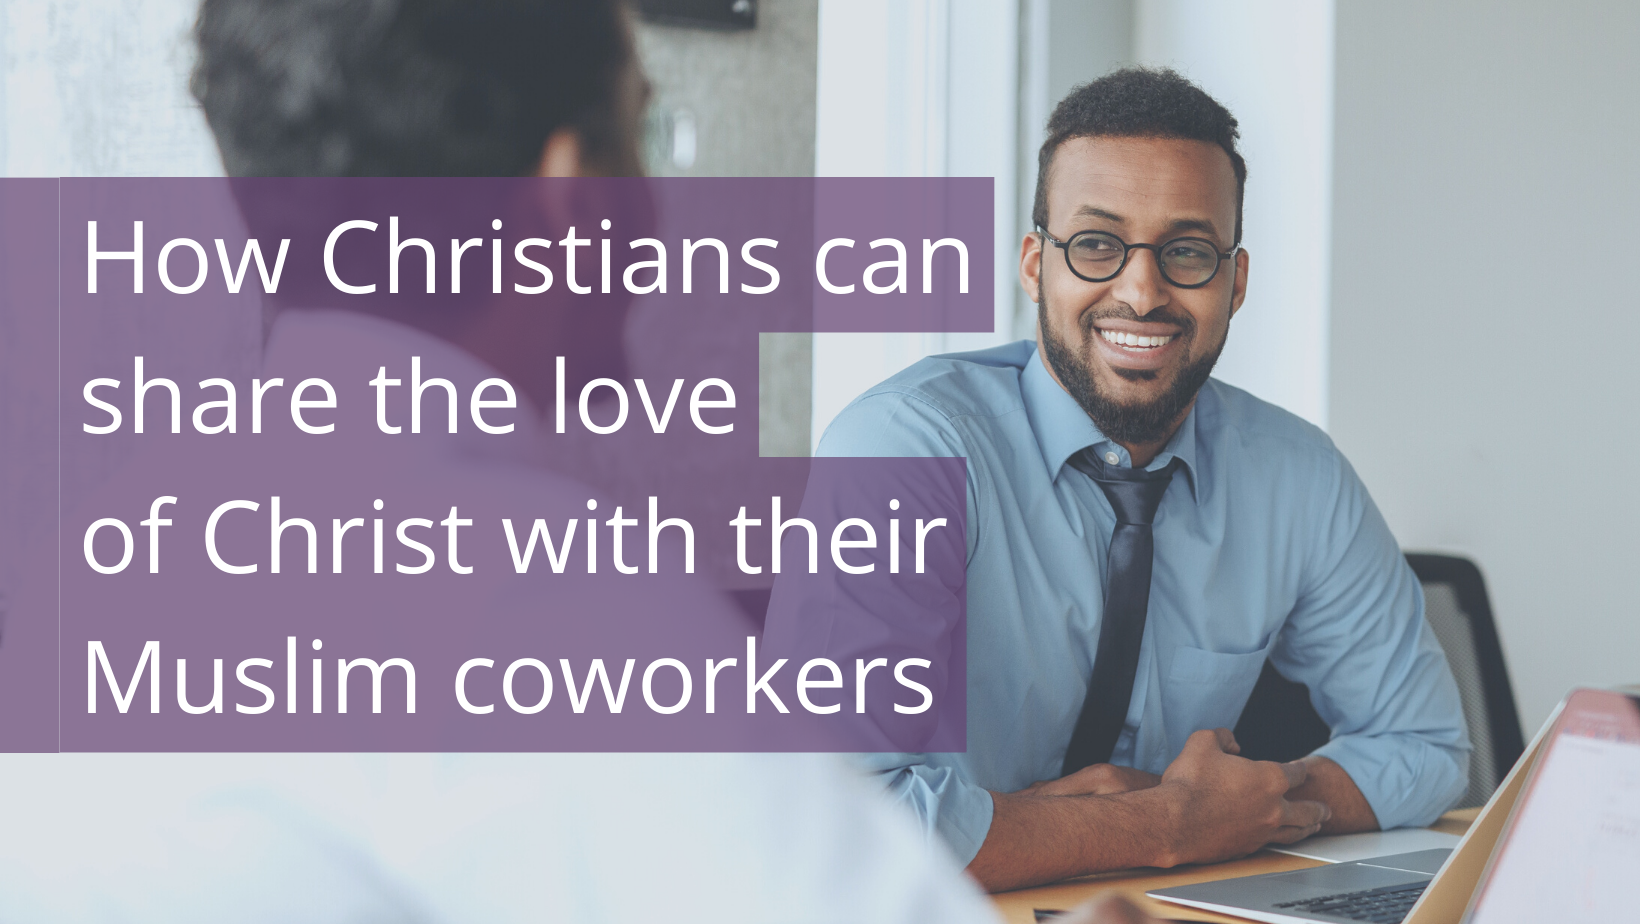 How Christians can share the love of Christ with their Muslim coworkers